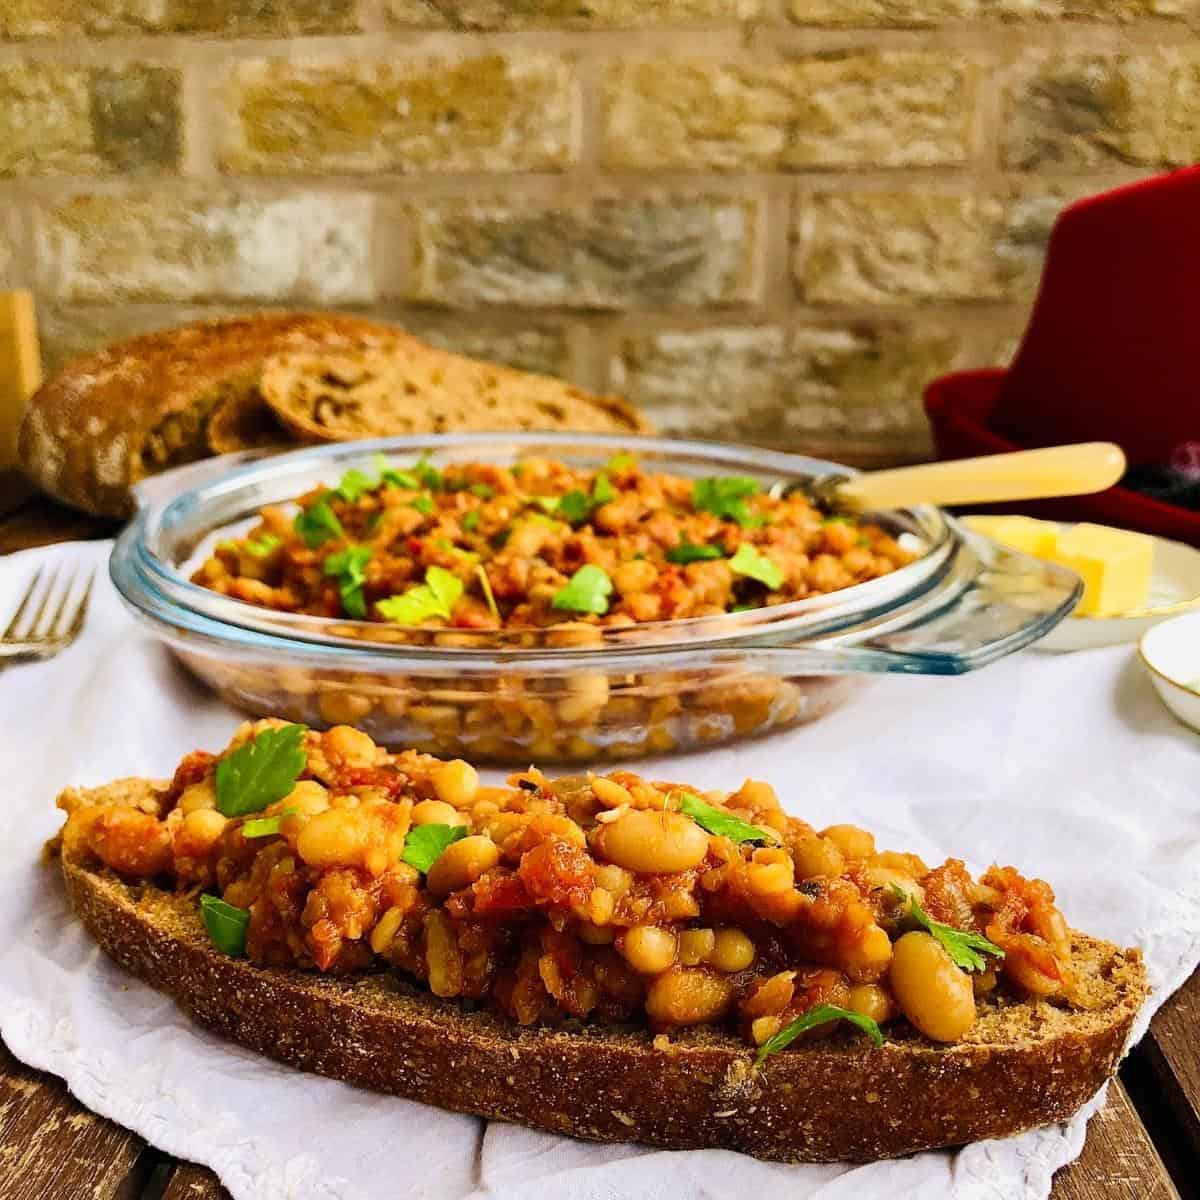 Smoky beans on a slice of sourdough. A dish full of smoky beans sits in the background